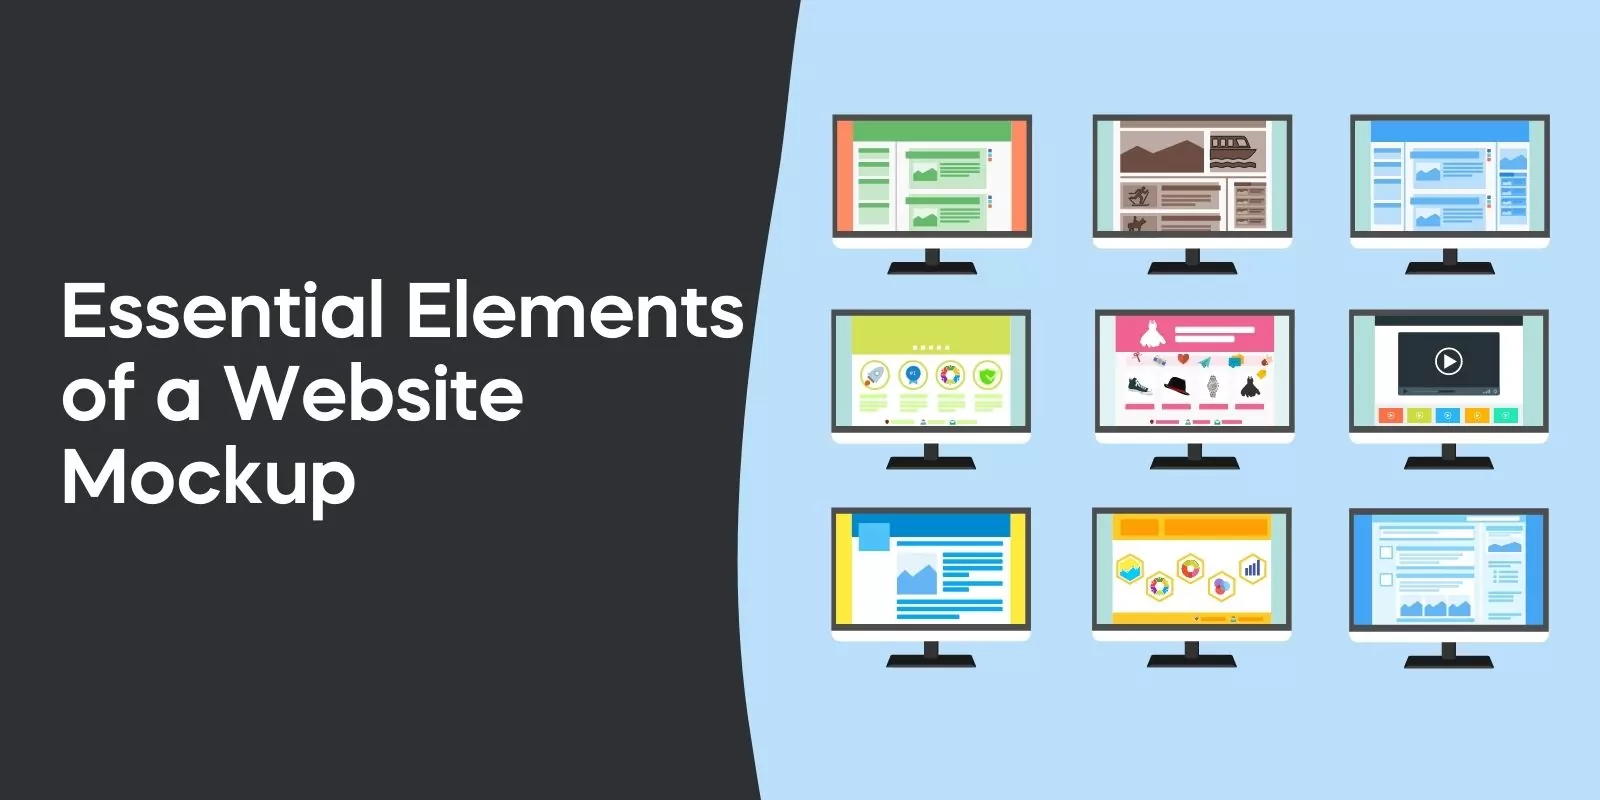 Essential Elements of a Website Mockup